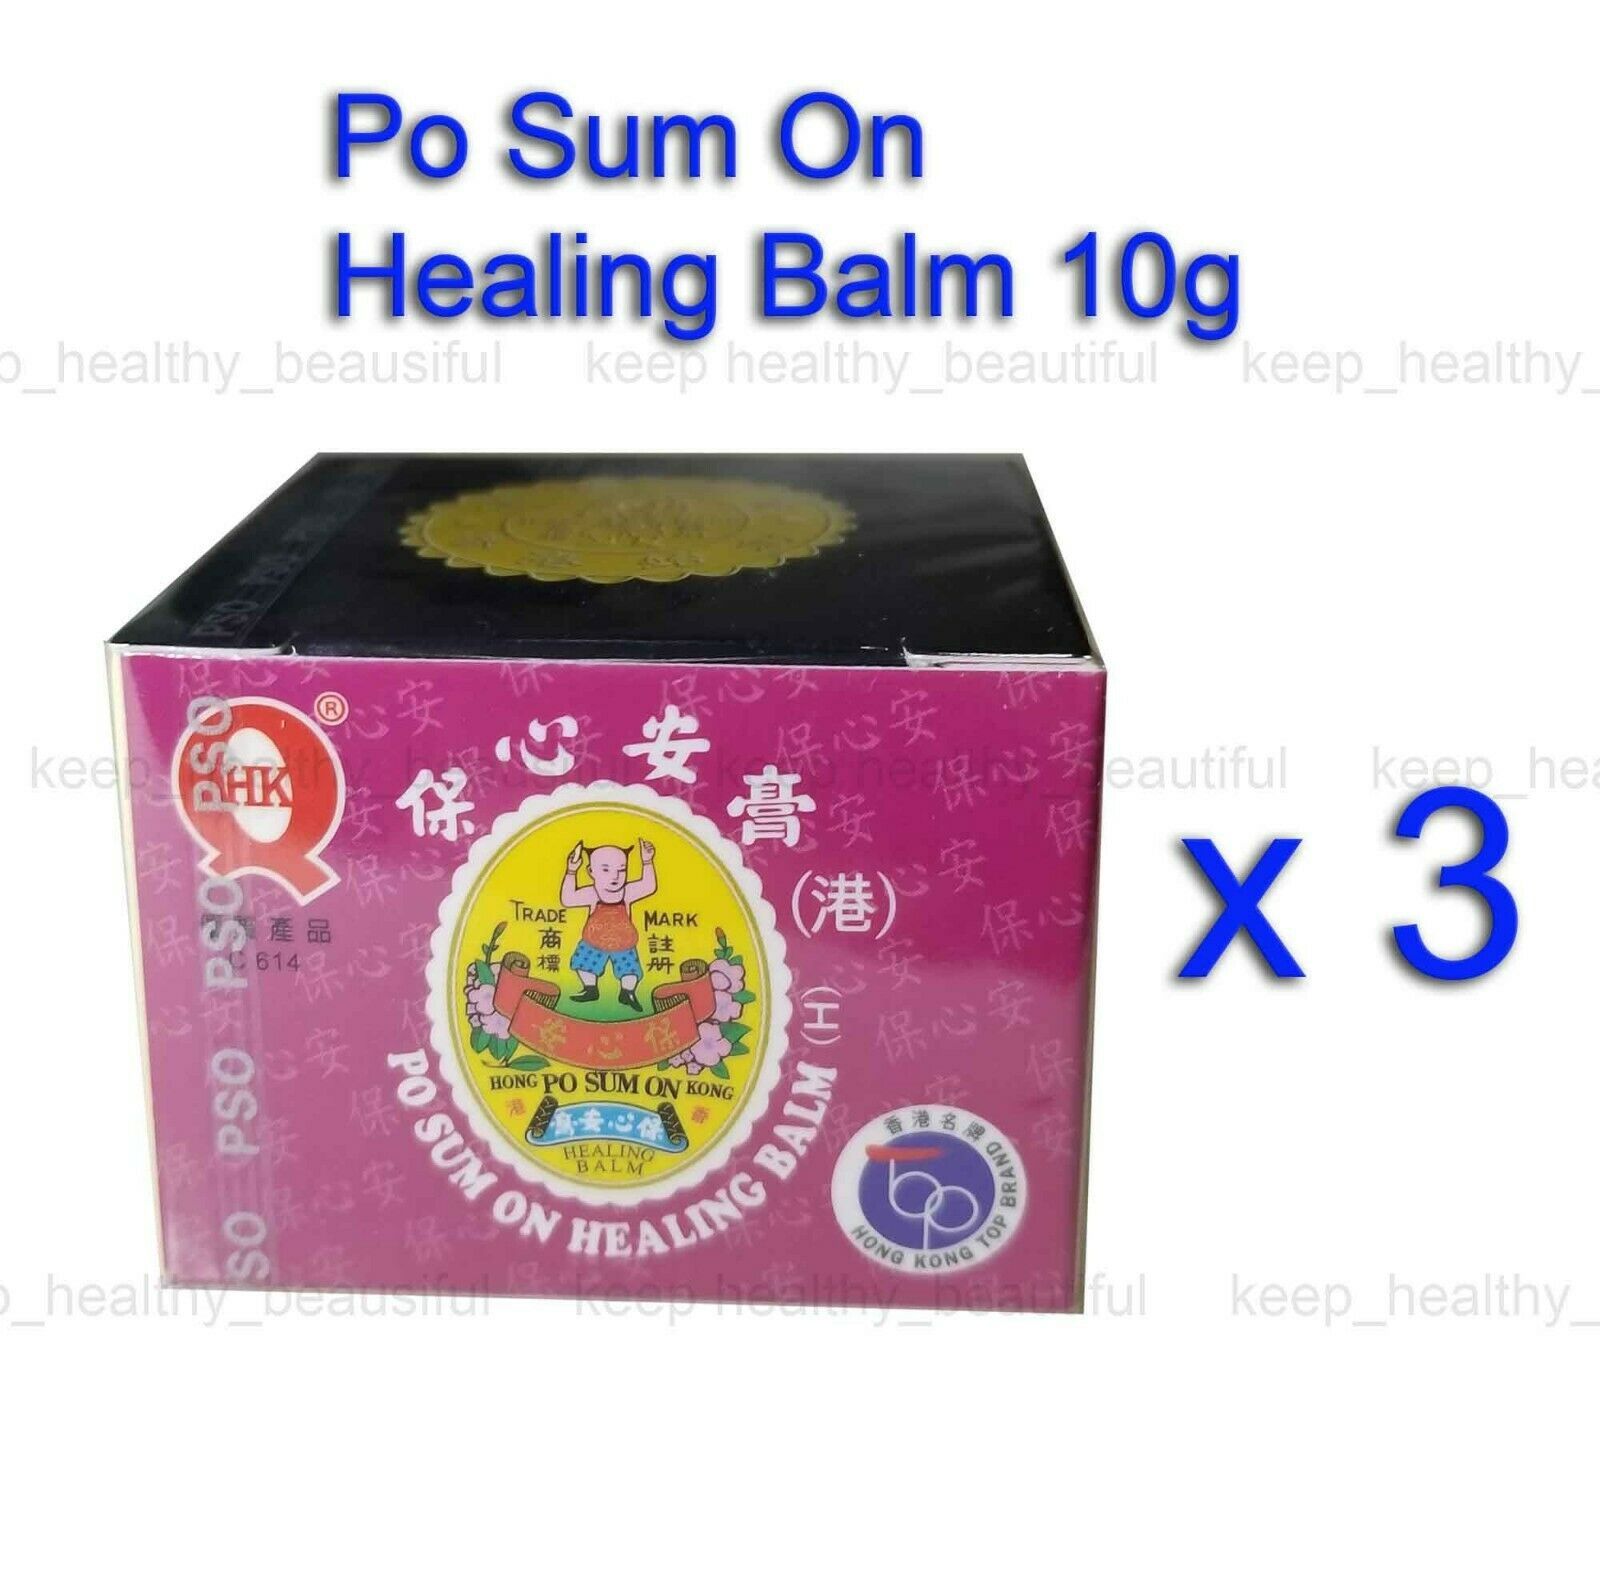 Primary image for 3 x 10g Po Sum On Healing Balm Headache Dizziness Muscular Pain Insect Bites